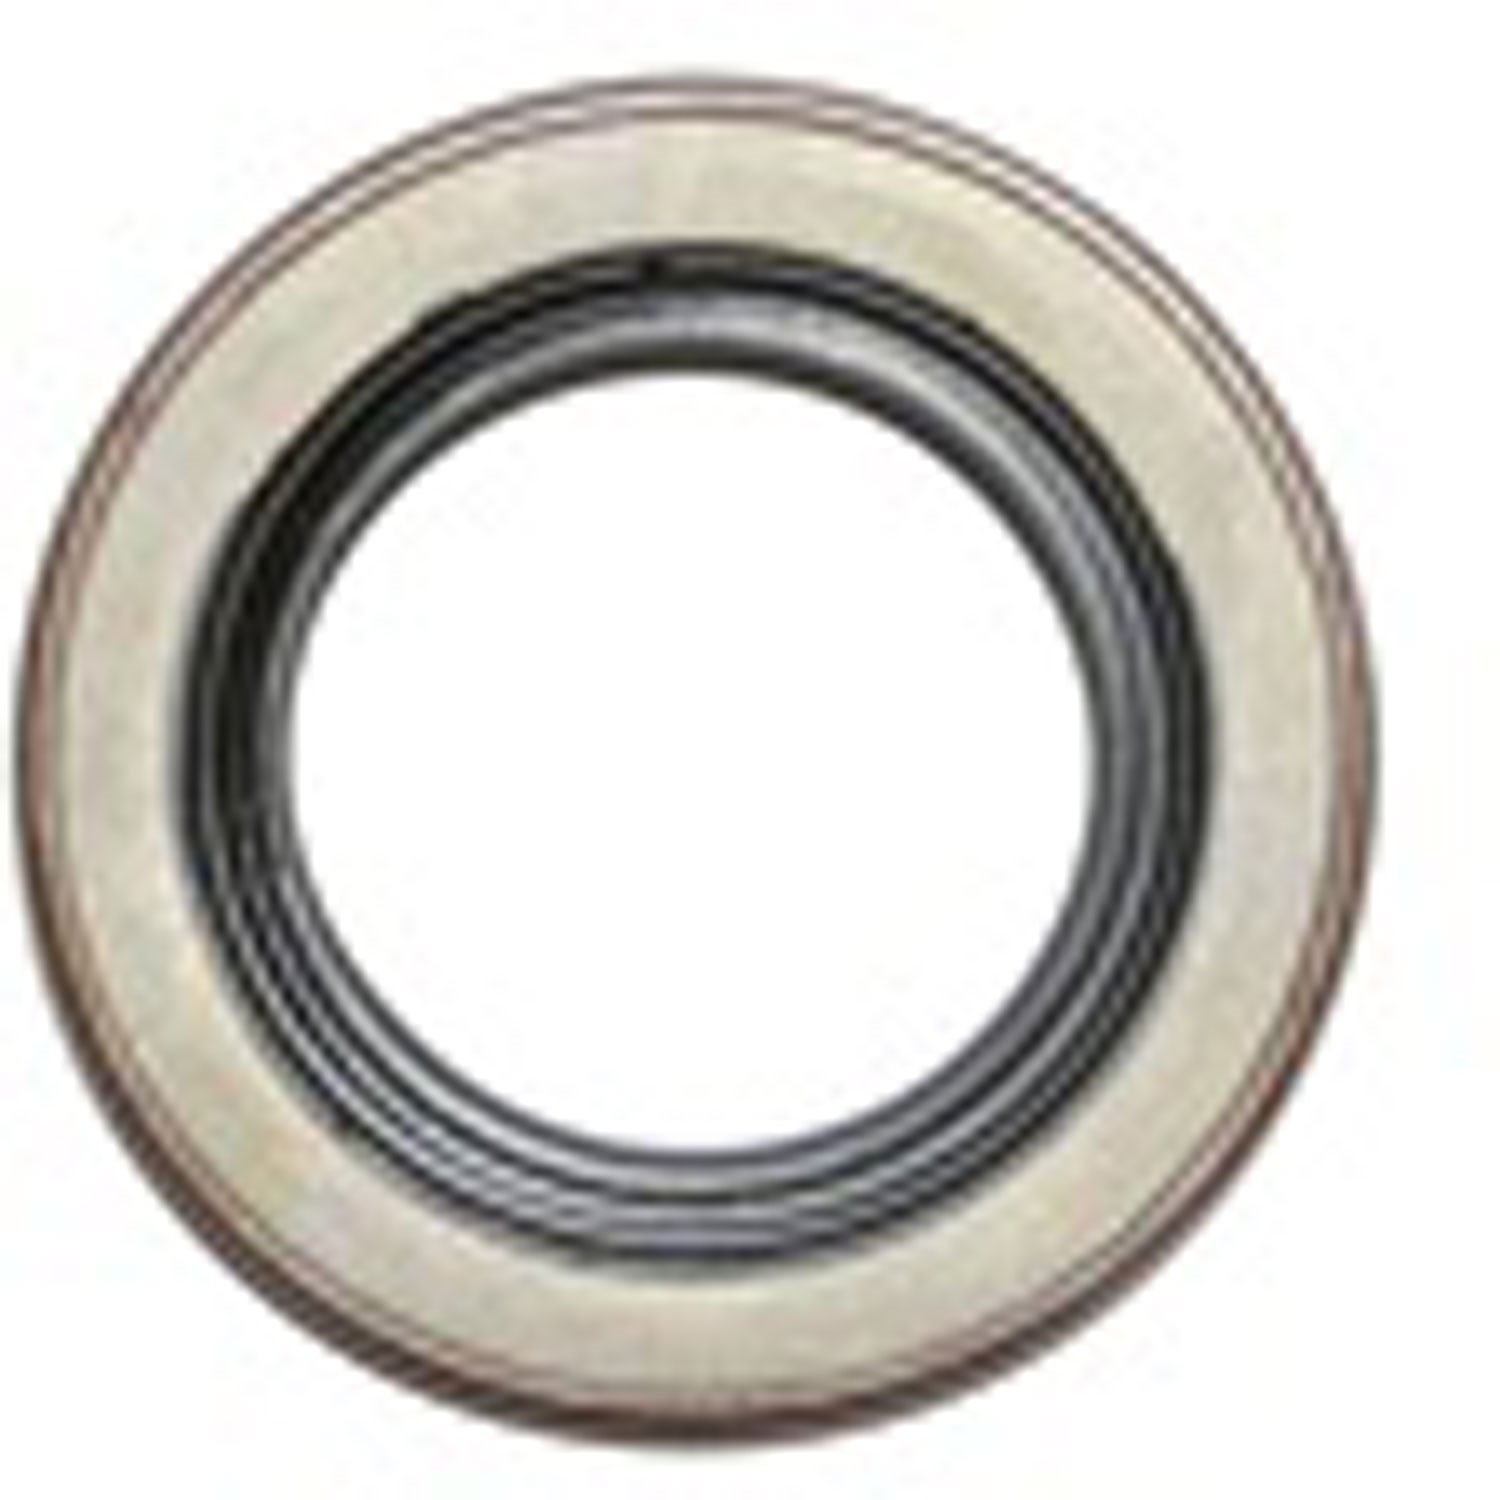 Rear Inner Axle Oil Seal for Dana 44 with Tapered Axles 1948-1969 CJ